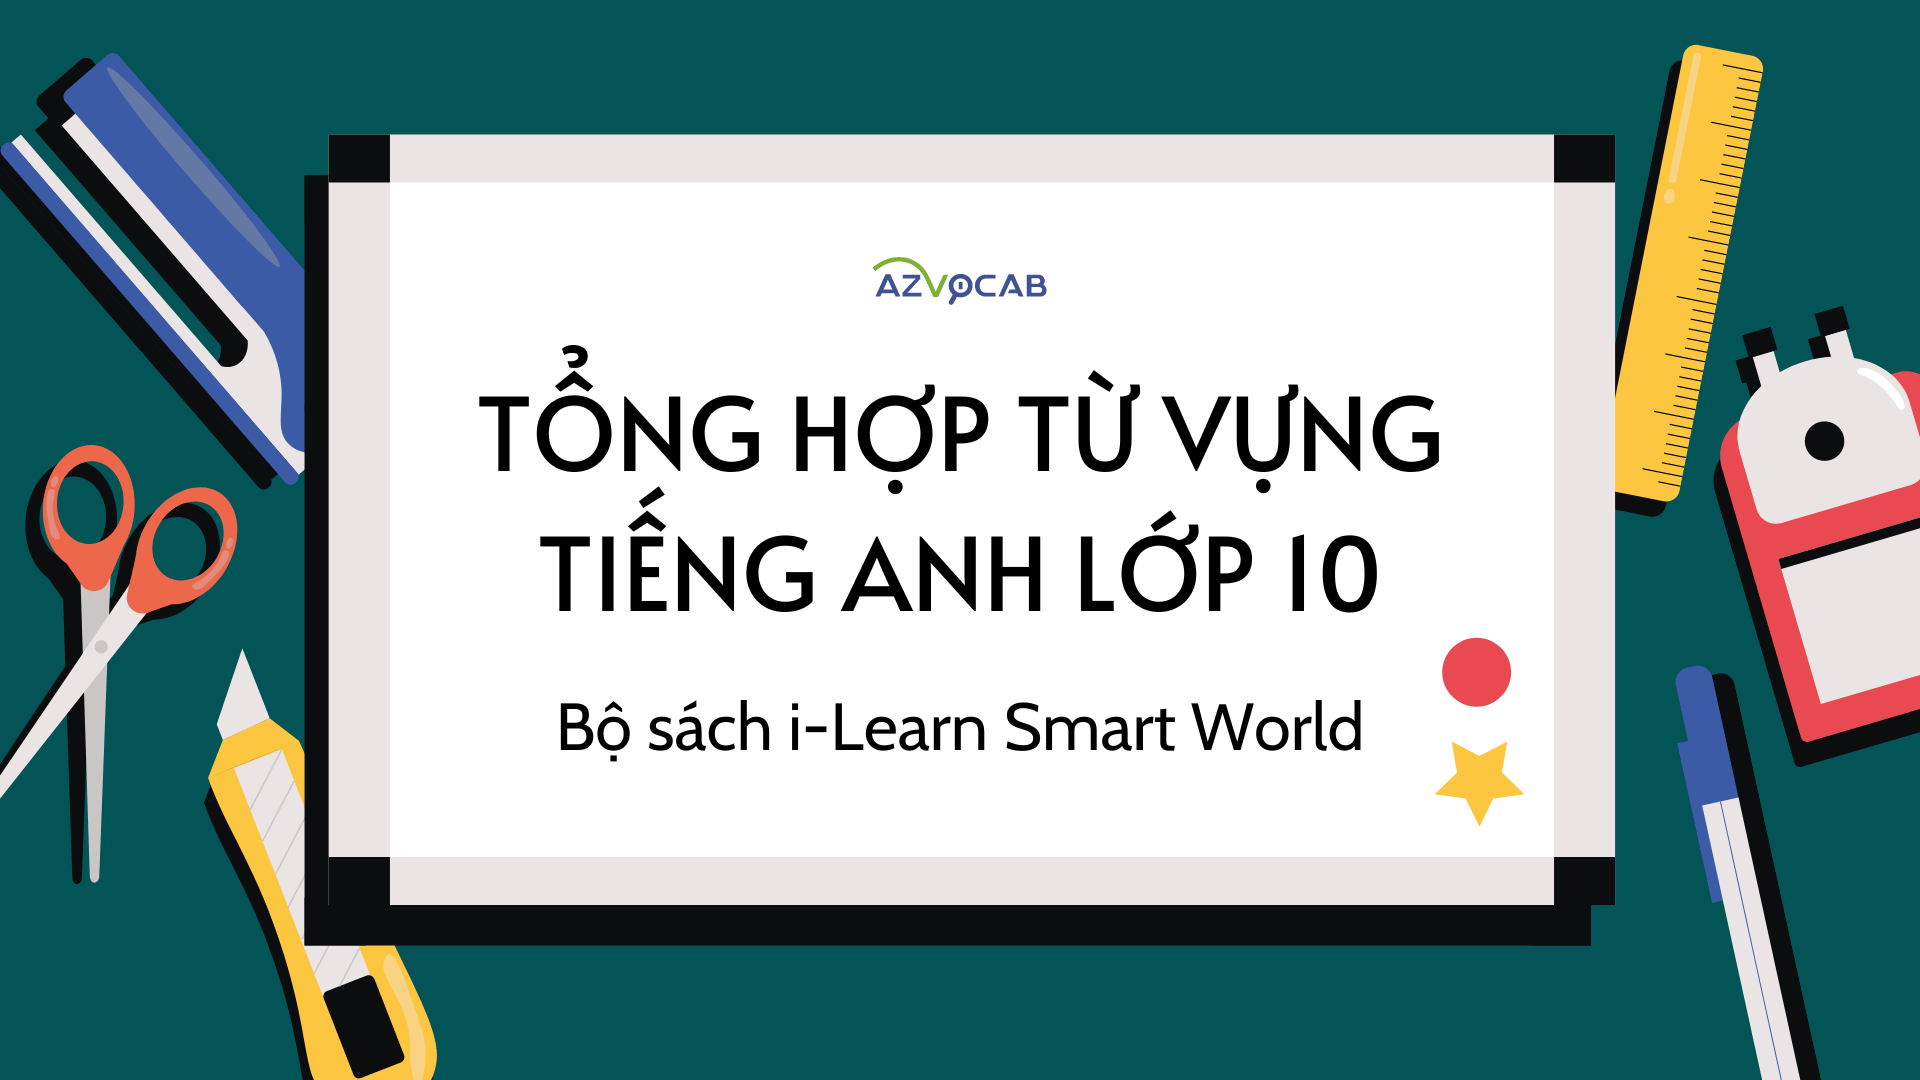 Tiếng Anh lớp 10 i-Learn Smart World